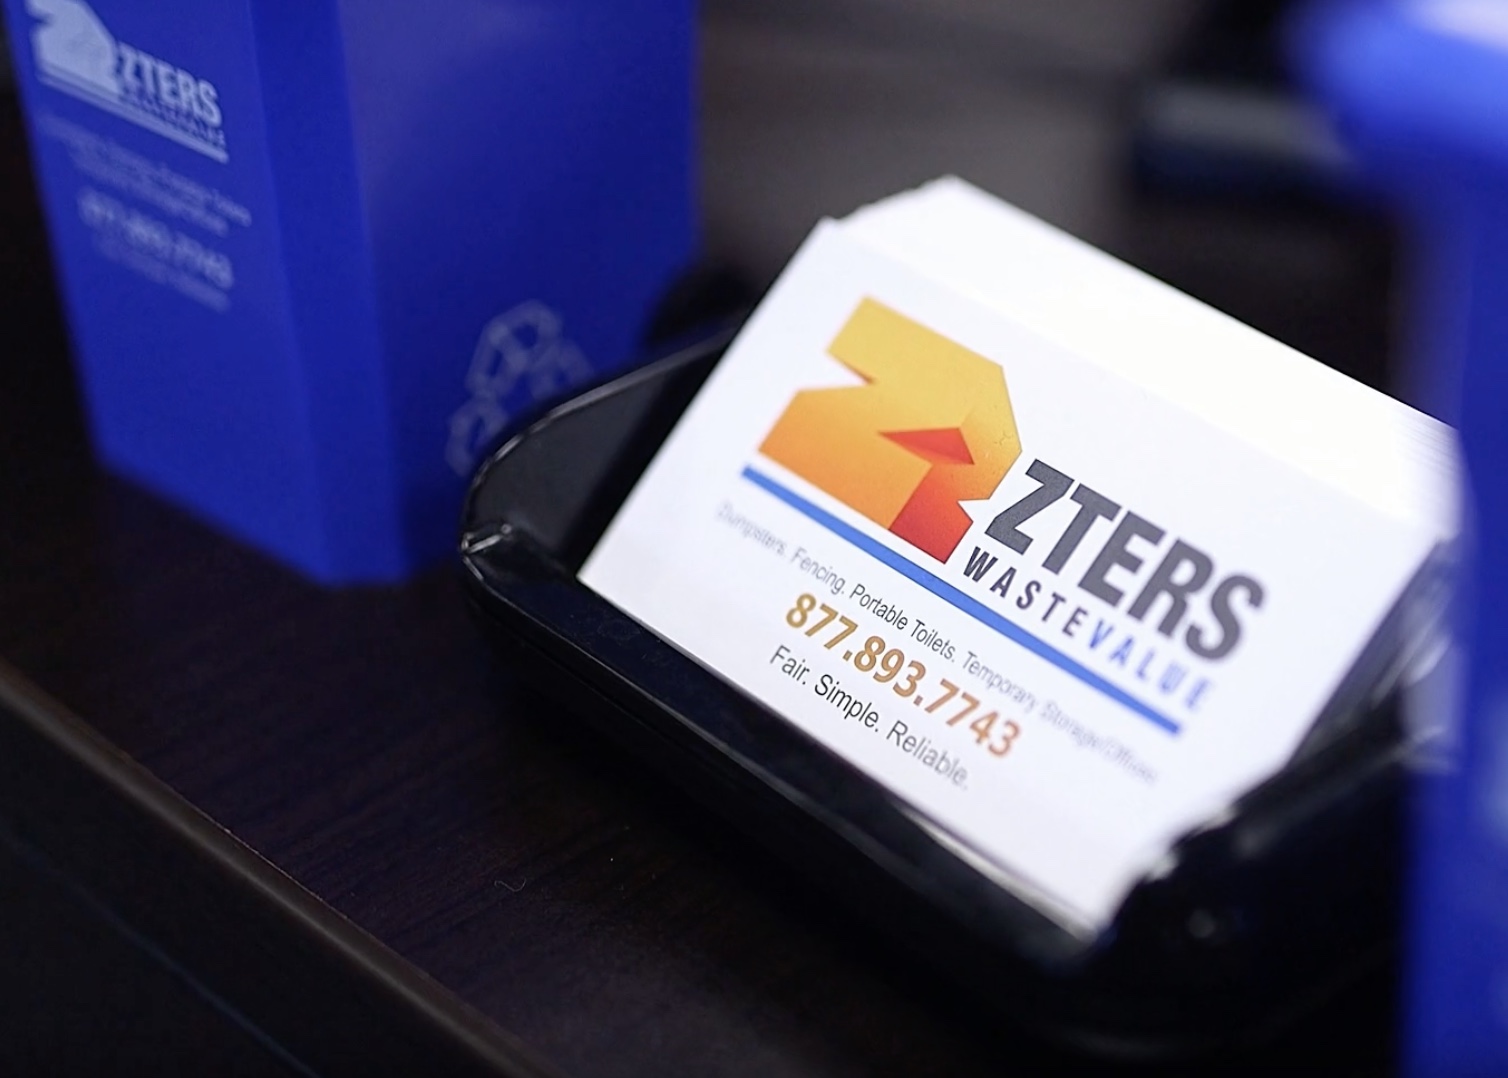 ZTERS business card with company phone number